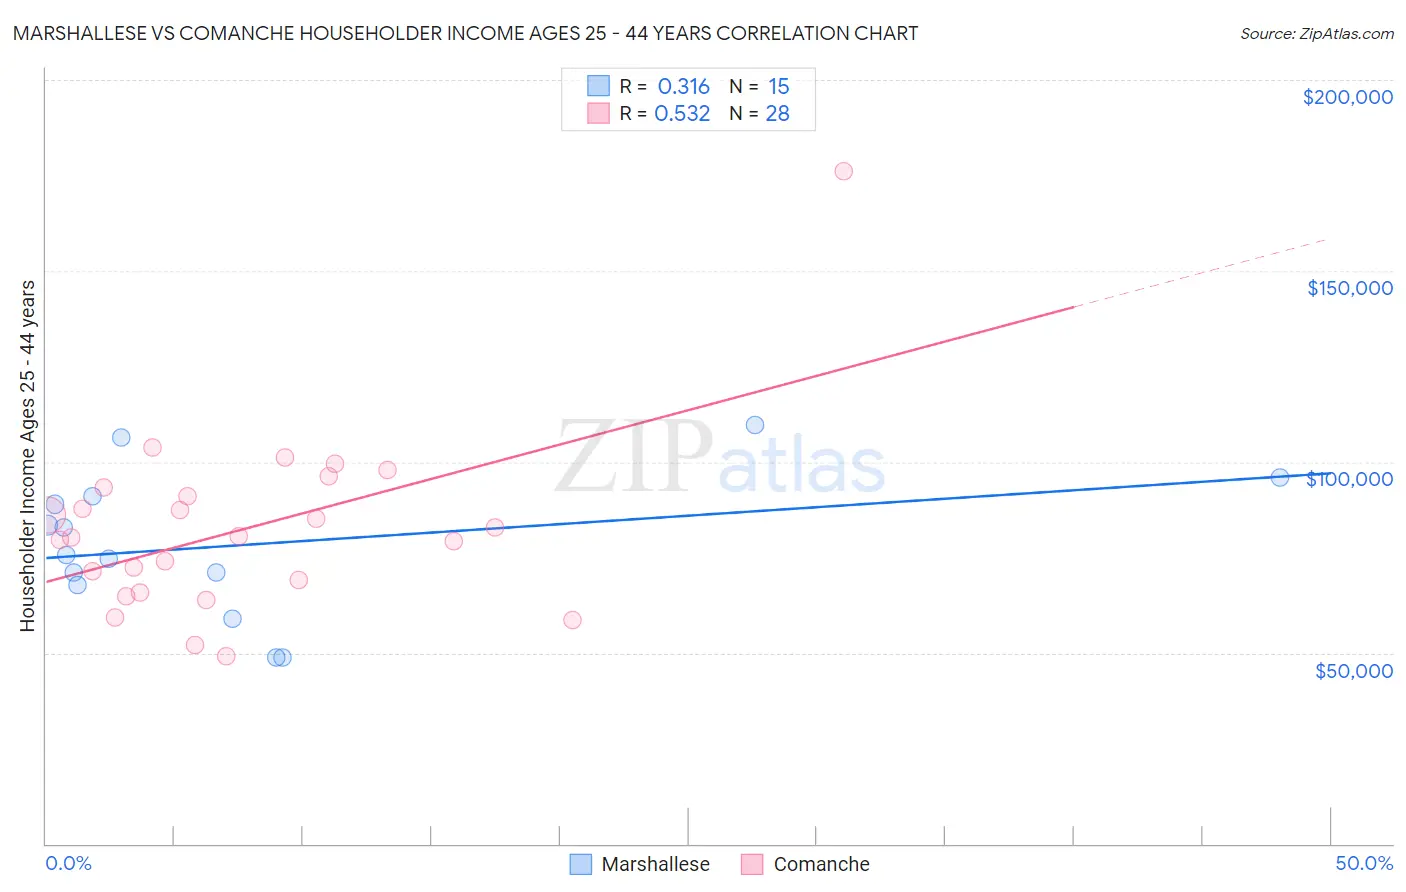 Marshallese vs Comanche Householder Income Ages 25 - 44 years